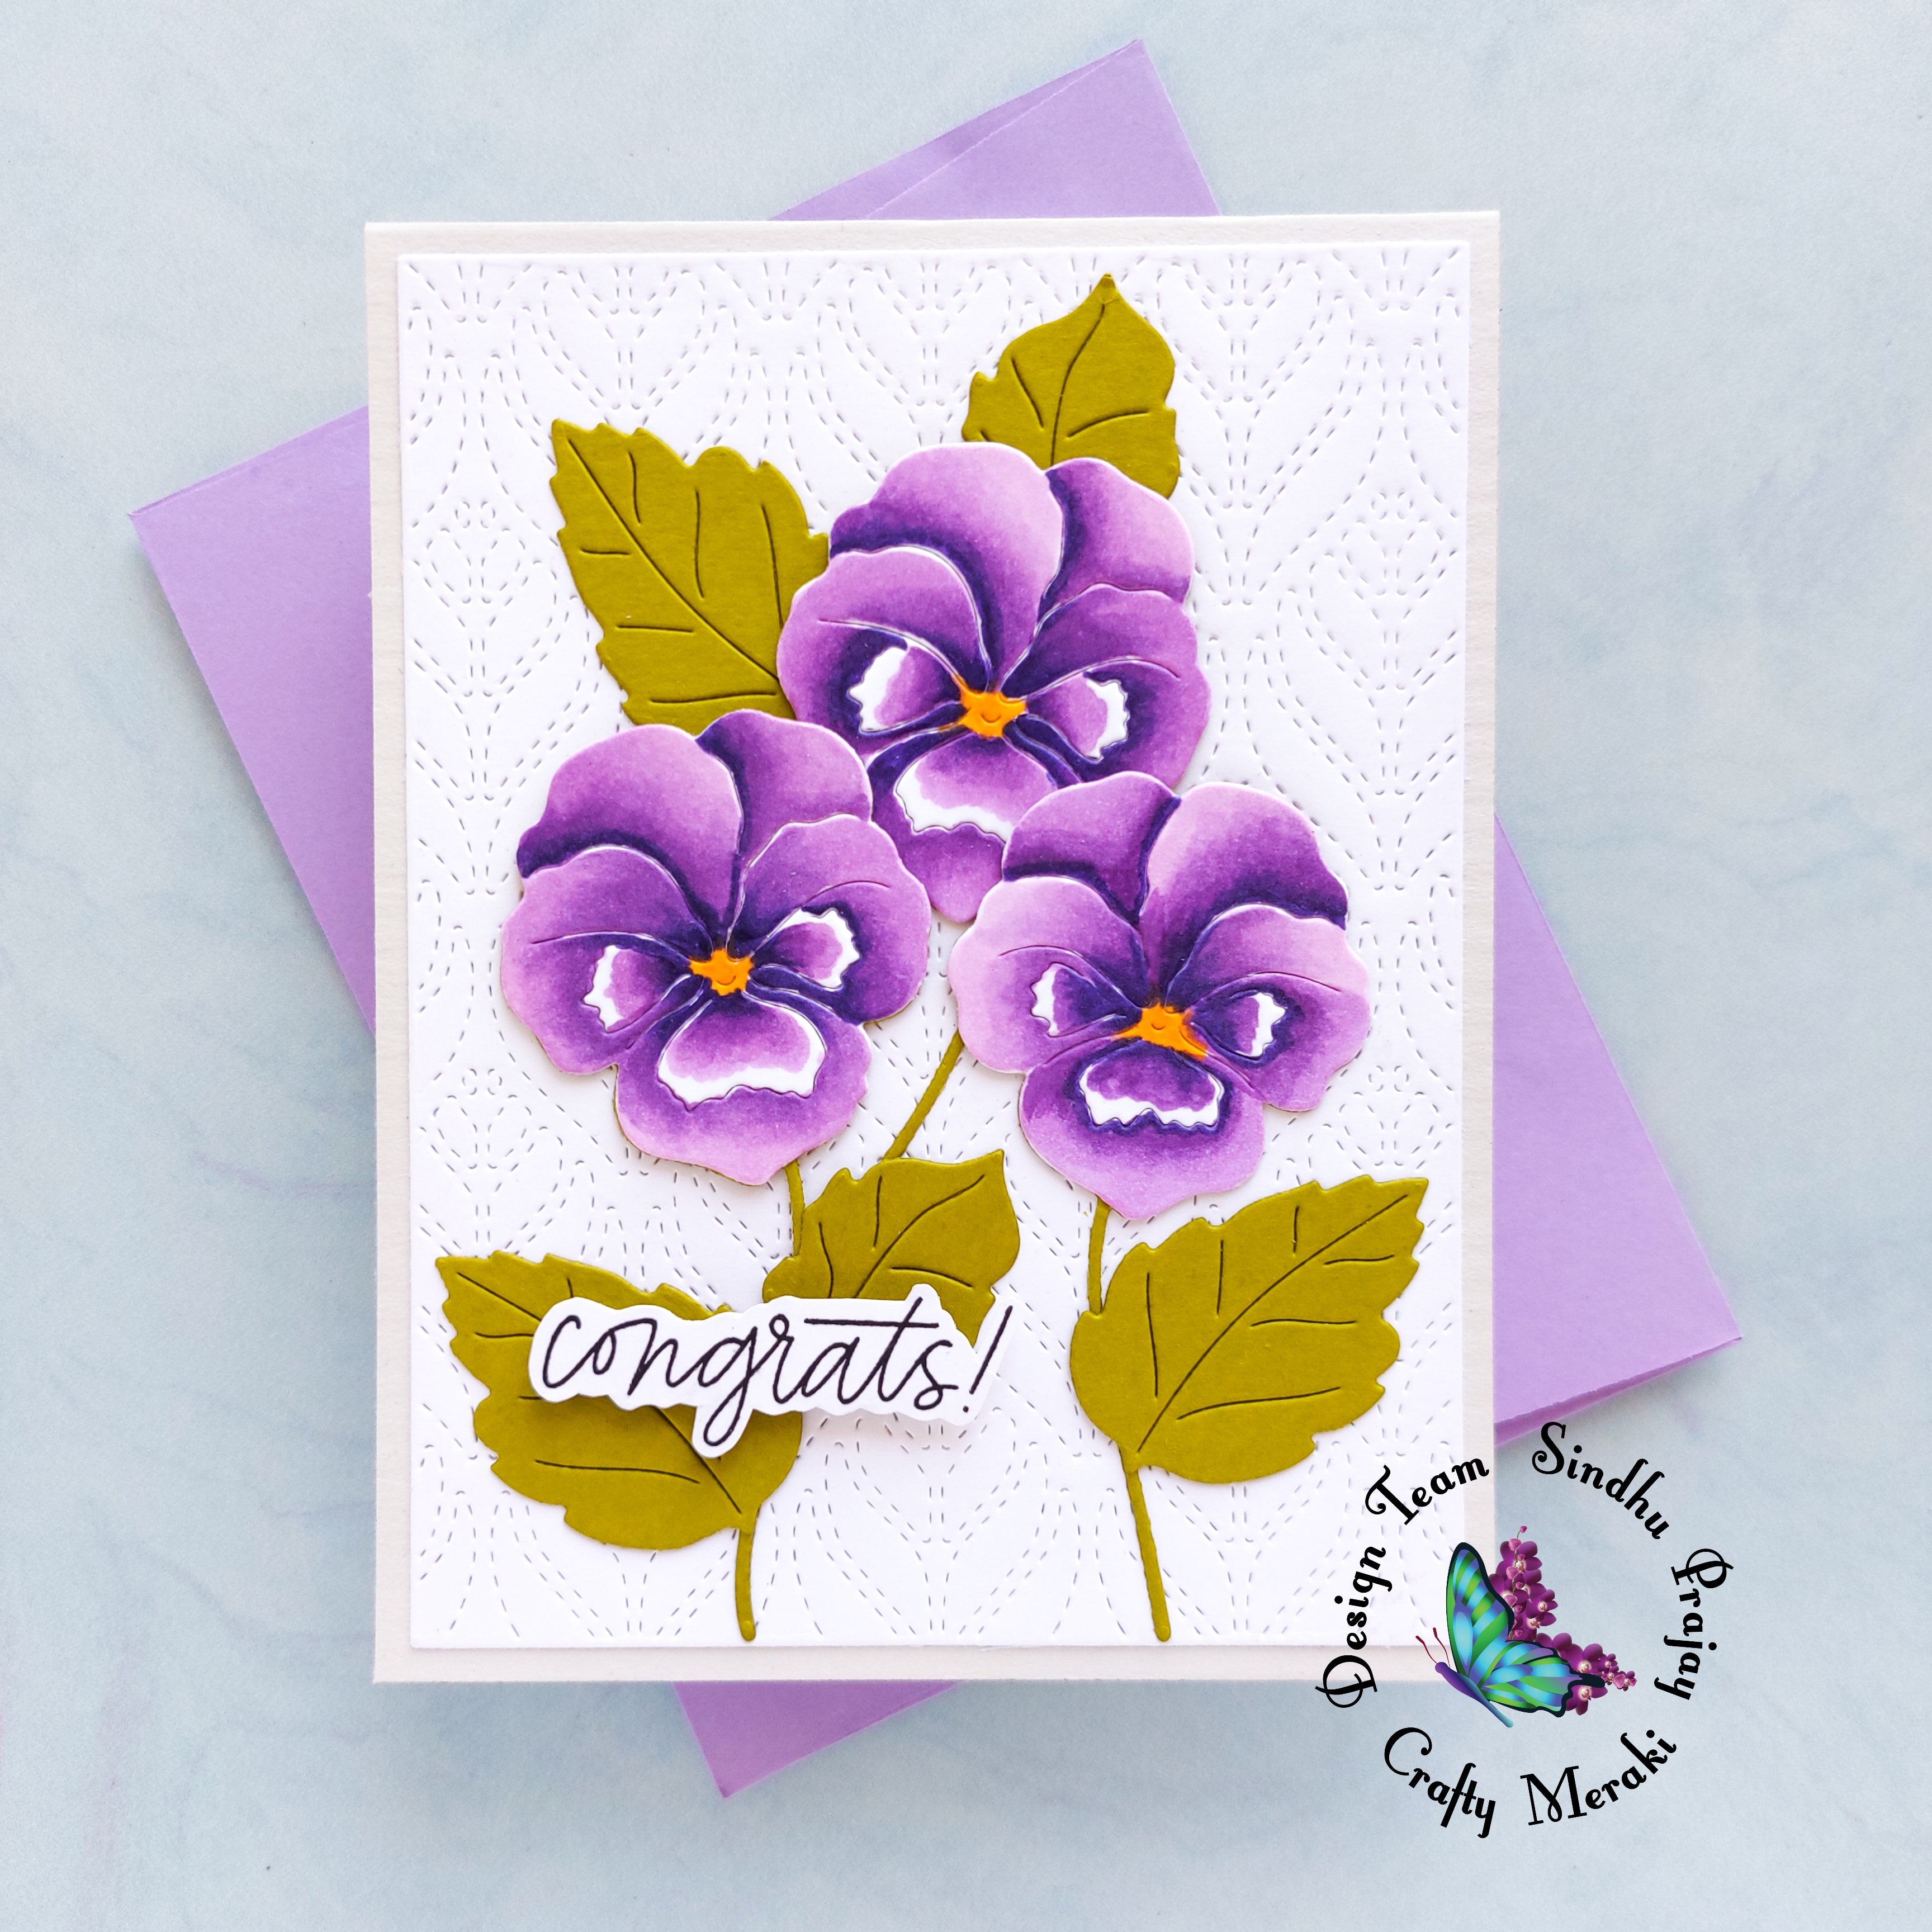 Congrats floral card by Sindhu